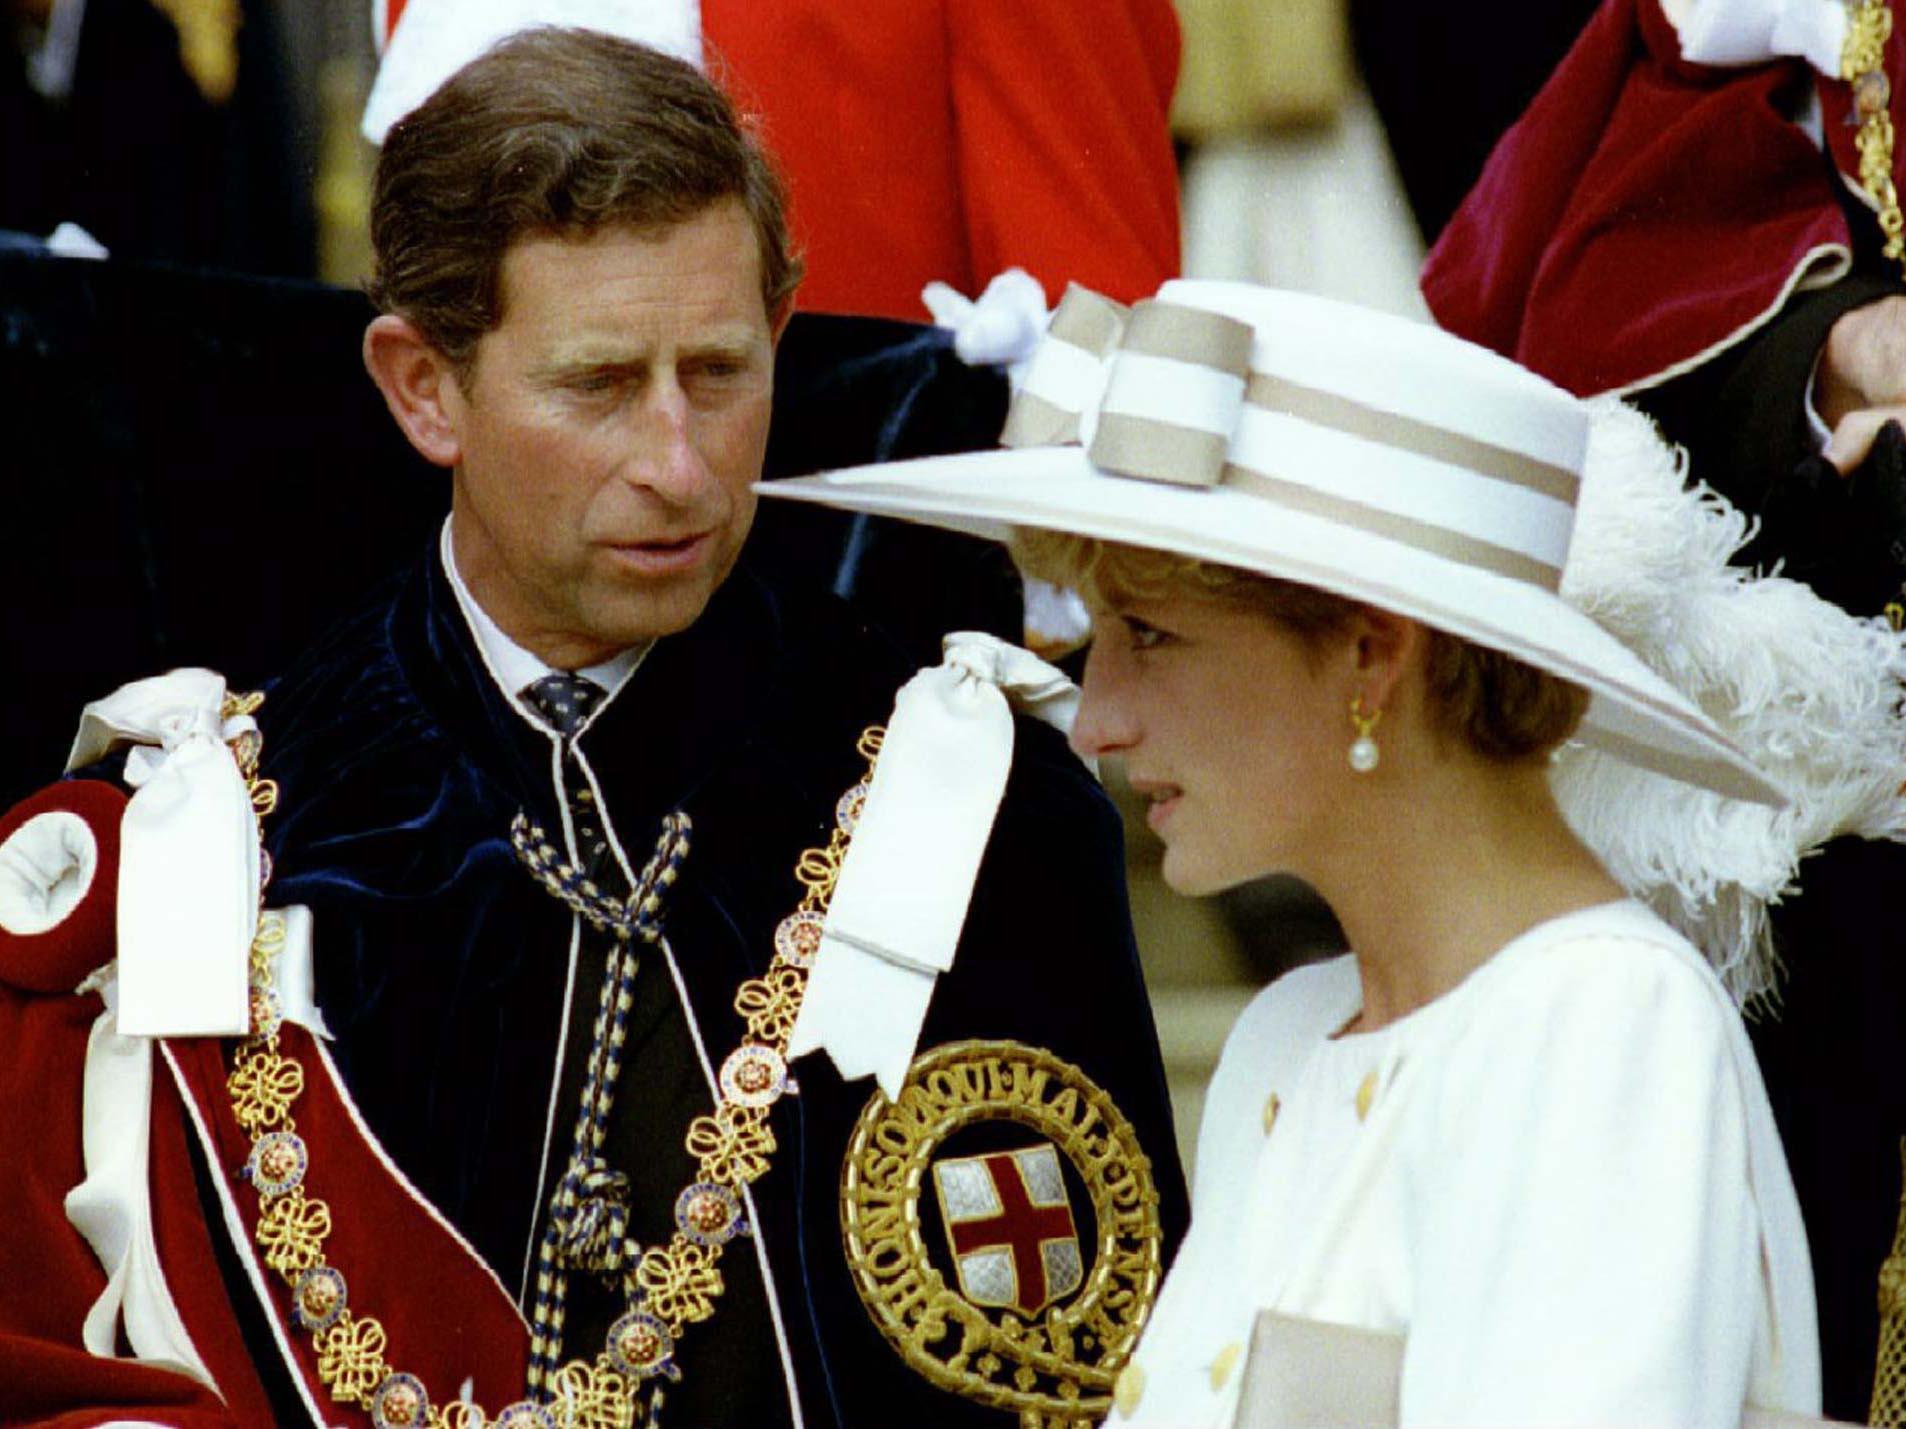 Prince Charles and Princess Diana pictured together in 1992